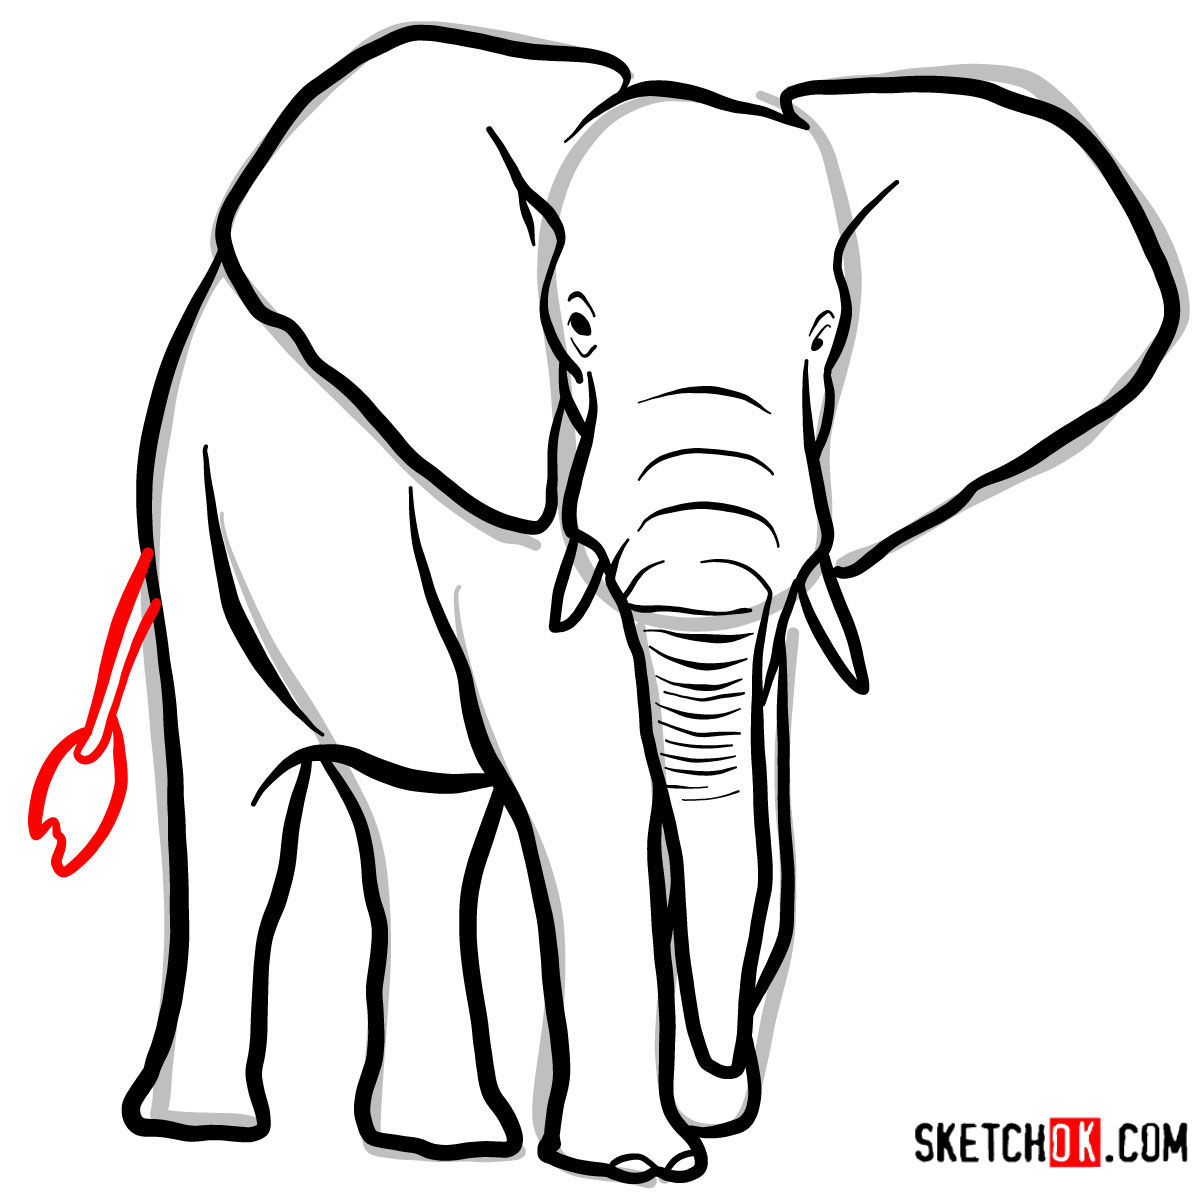 How to draw an Elephant front view Wild Animals Sketchok easy